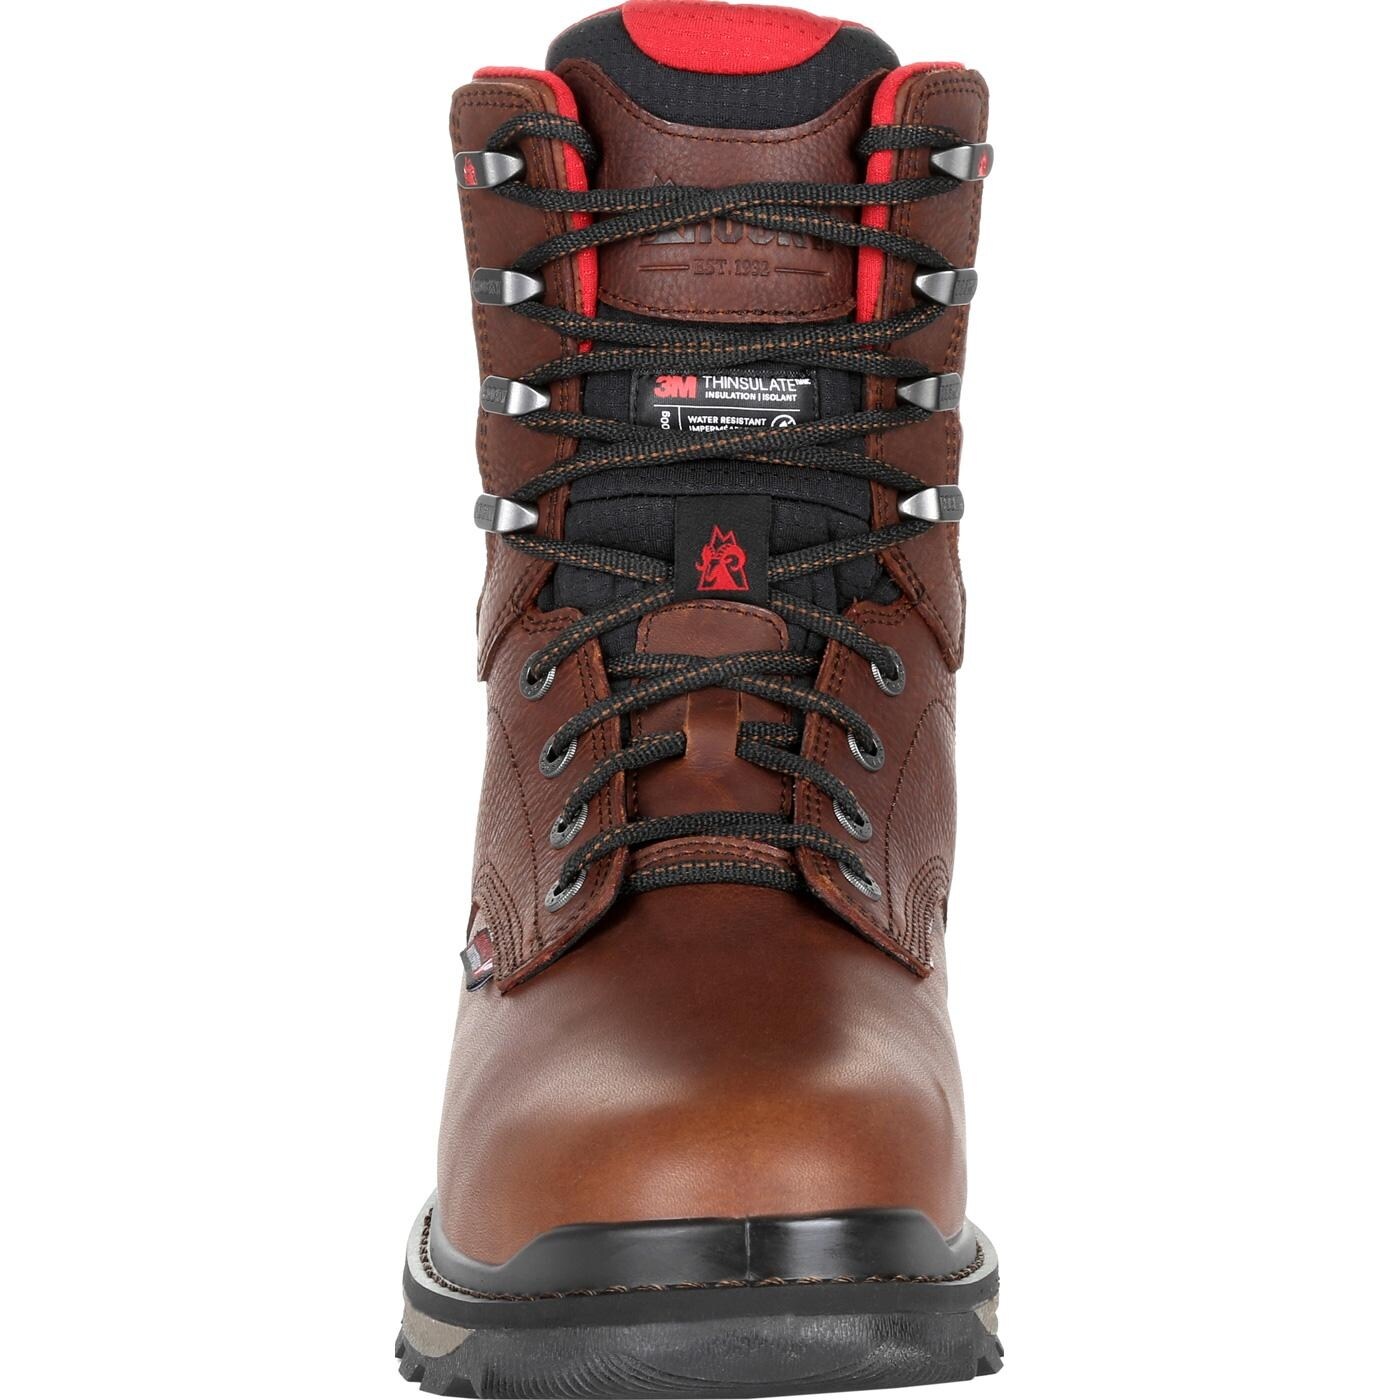 800 gram insulated work boots composite toe